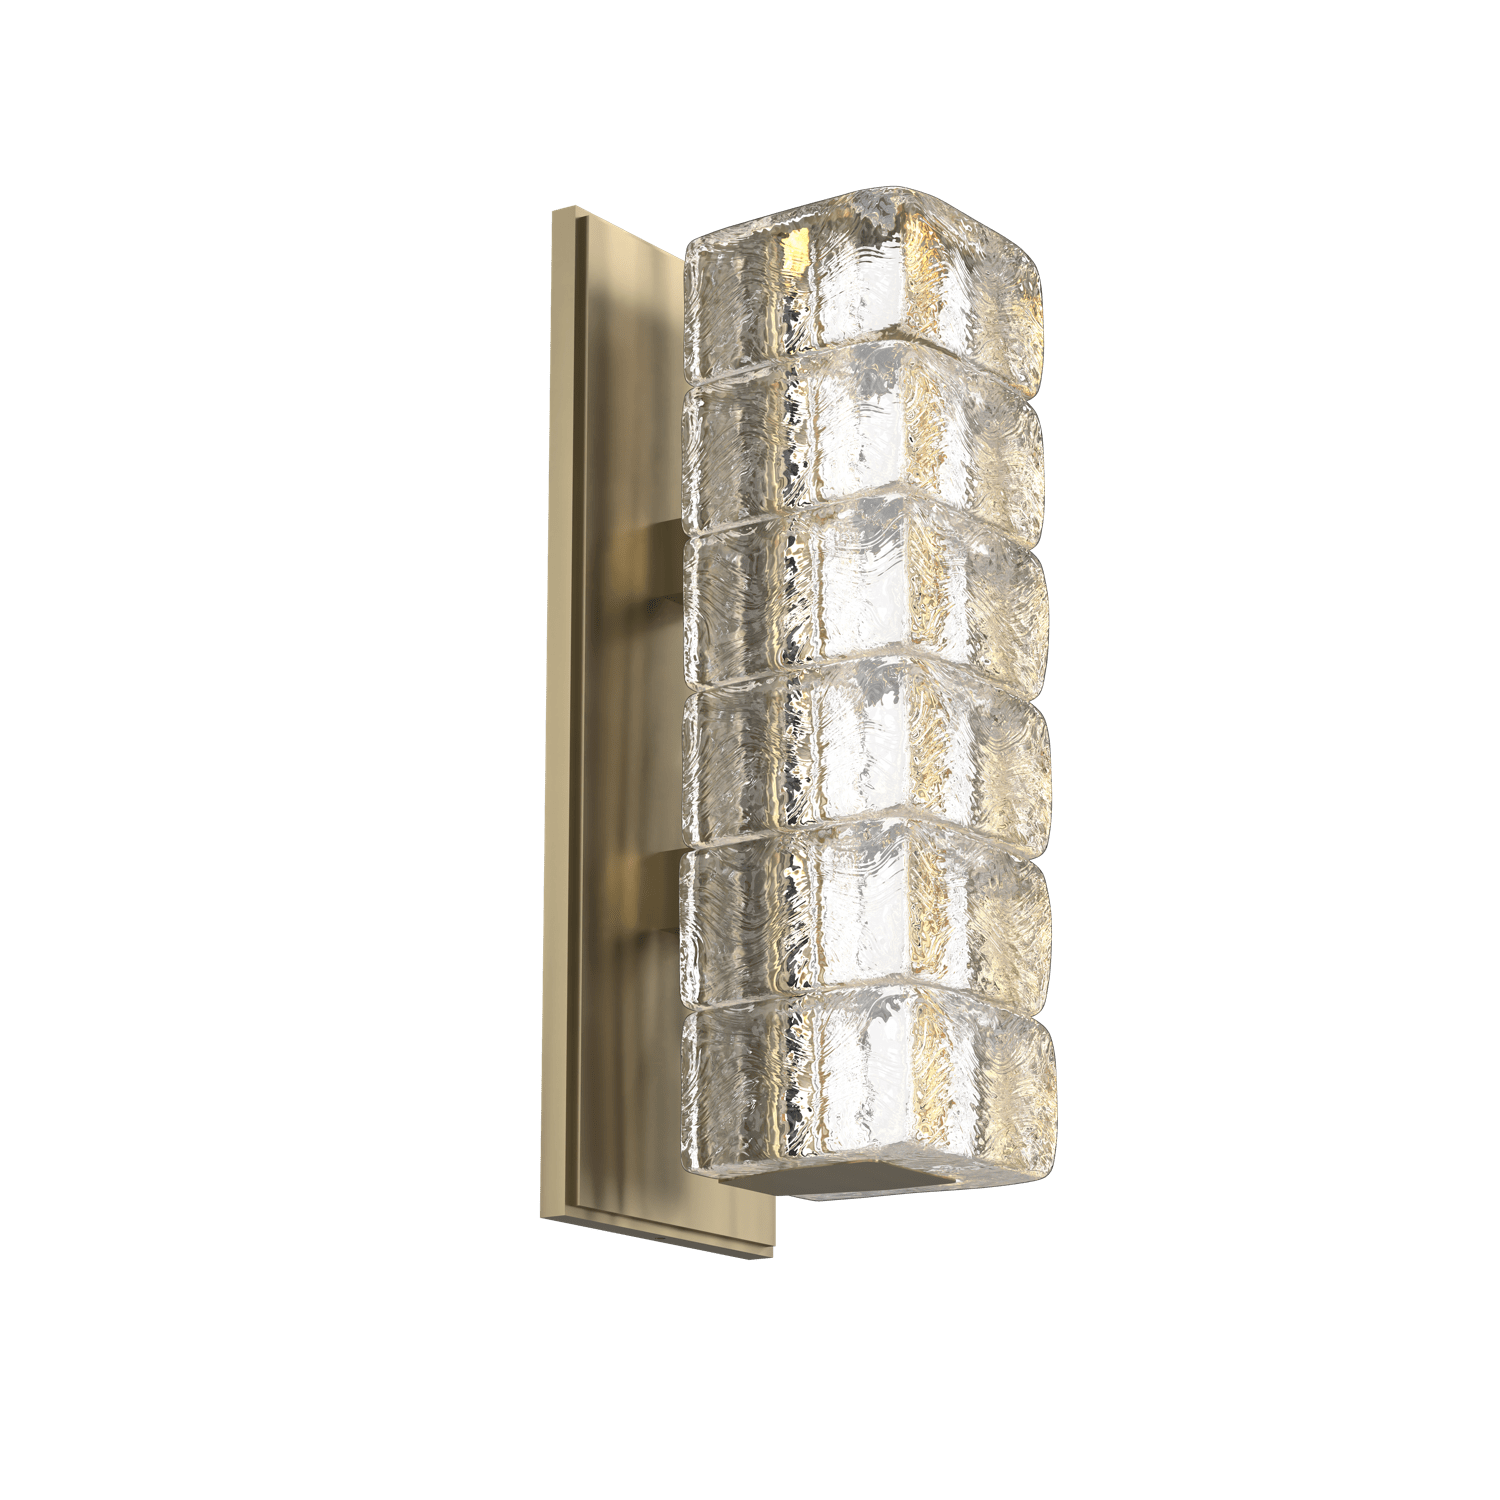 IDB0080-01-HB-Hammerton-Studio-Asscher-wall-sconce-with-heritage-brass-finish-and-clear-cast-glass-shades-and-LED-lamping